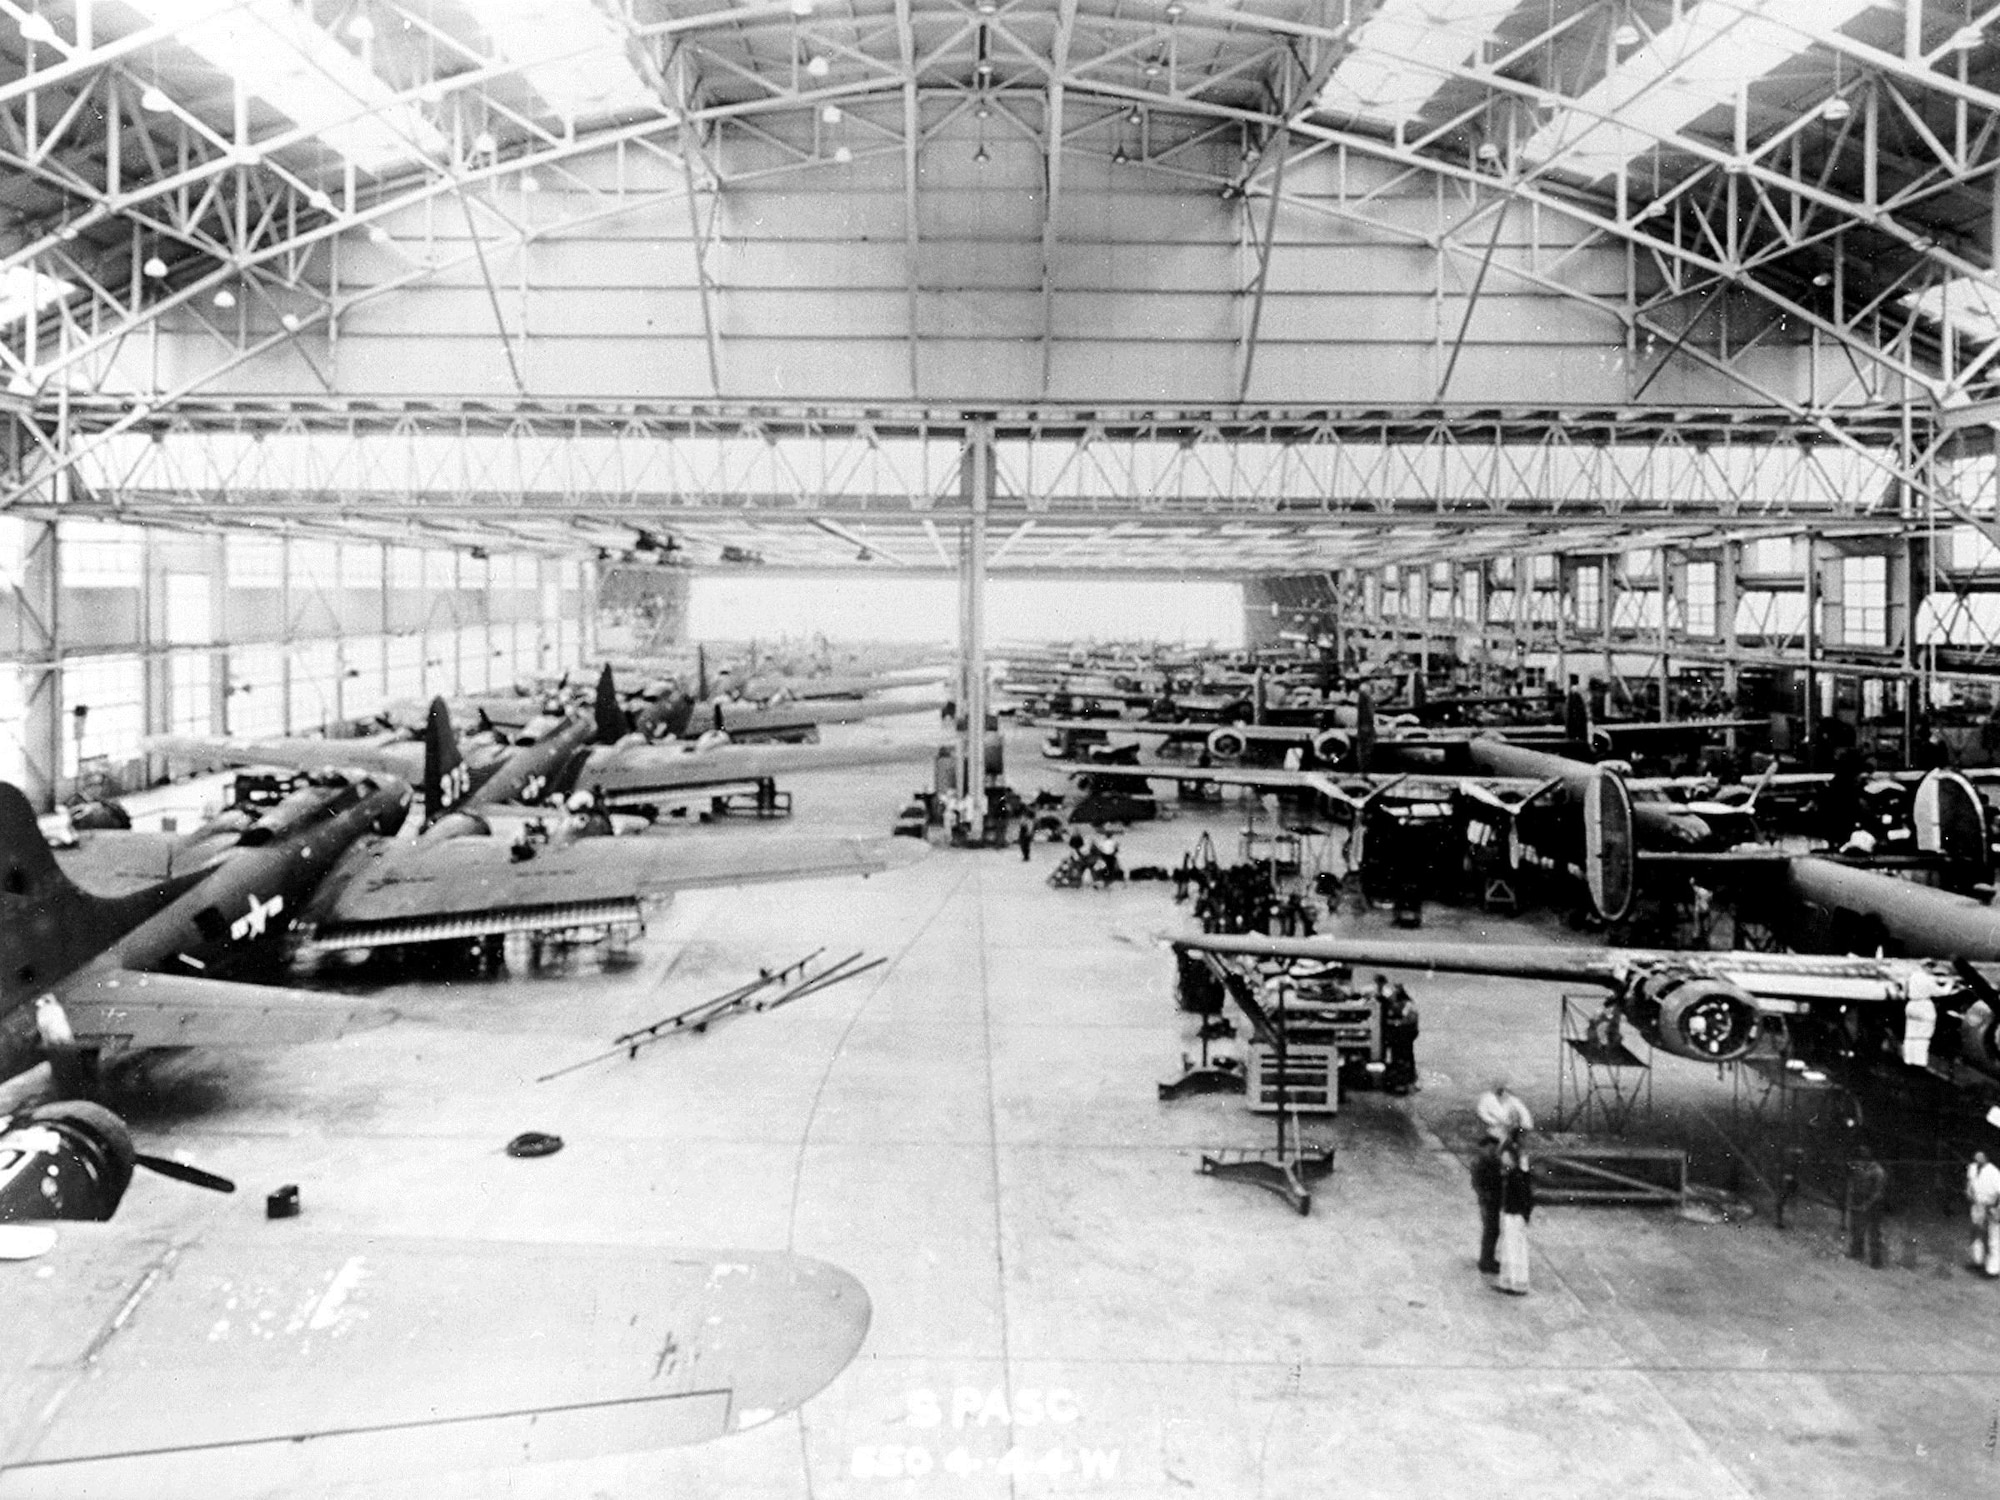 More than 1,250 B-17s had been repaired in building 2050 by November 1944 along with an impressive variety of other aircraft including B-24s, B-29s, B-25s, C-47s, P-38s, P-47s and P-51s. The estimated savings for repairing the B-17s was estimated at $51 million for the first four months of full operations. (U.S. Air Force photo/Airman 1st Class Mackenzie Richardson)